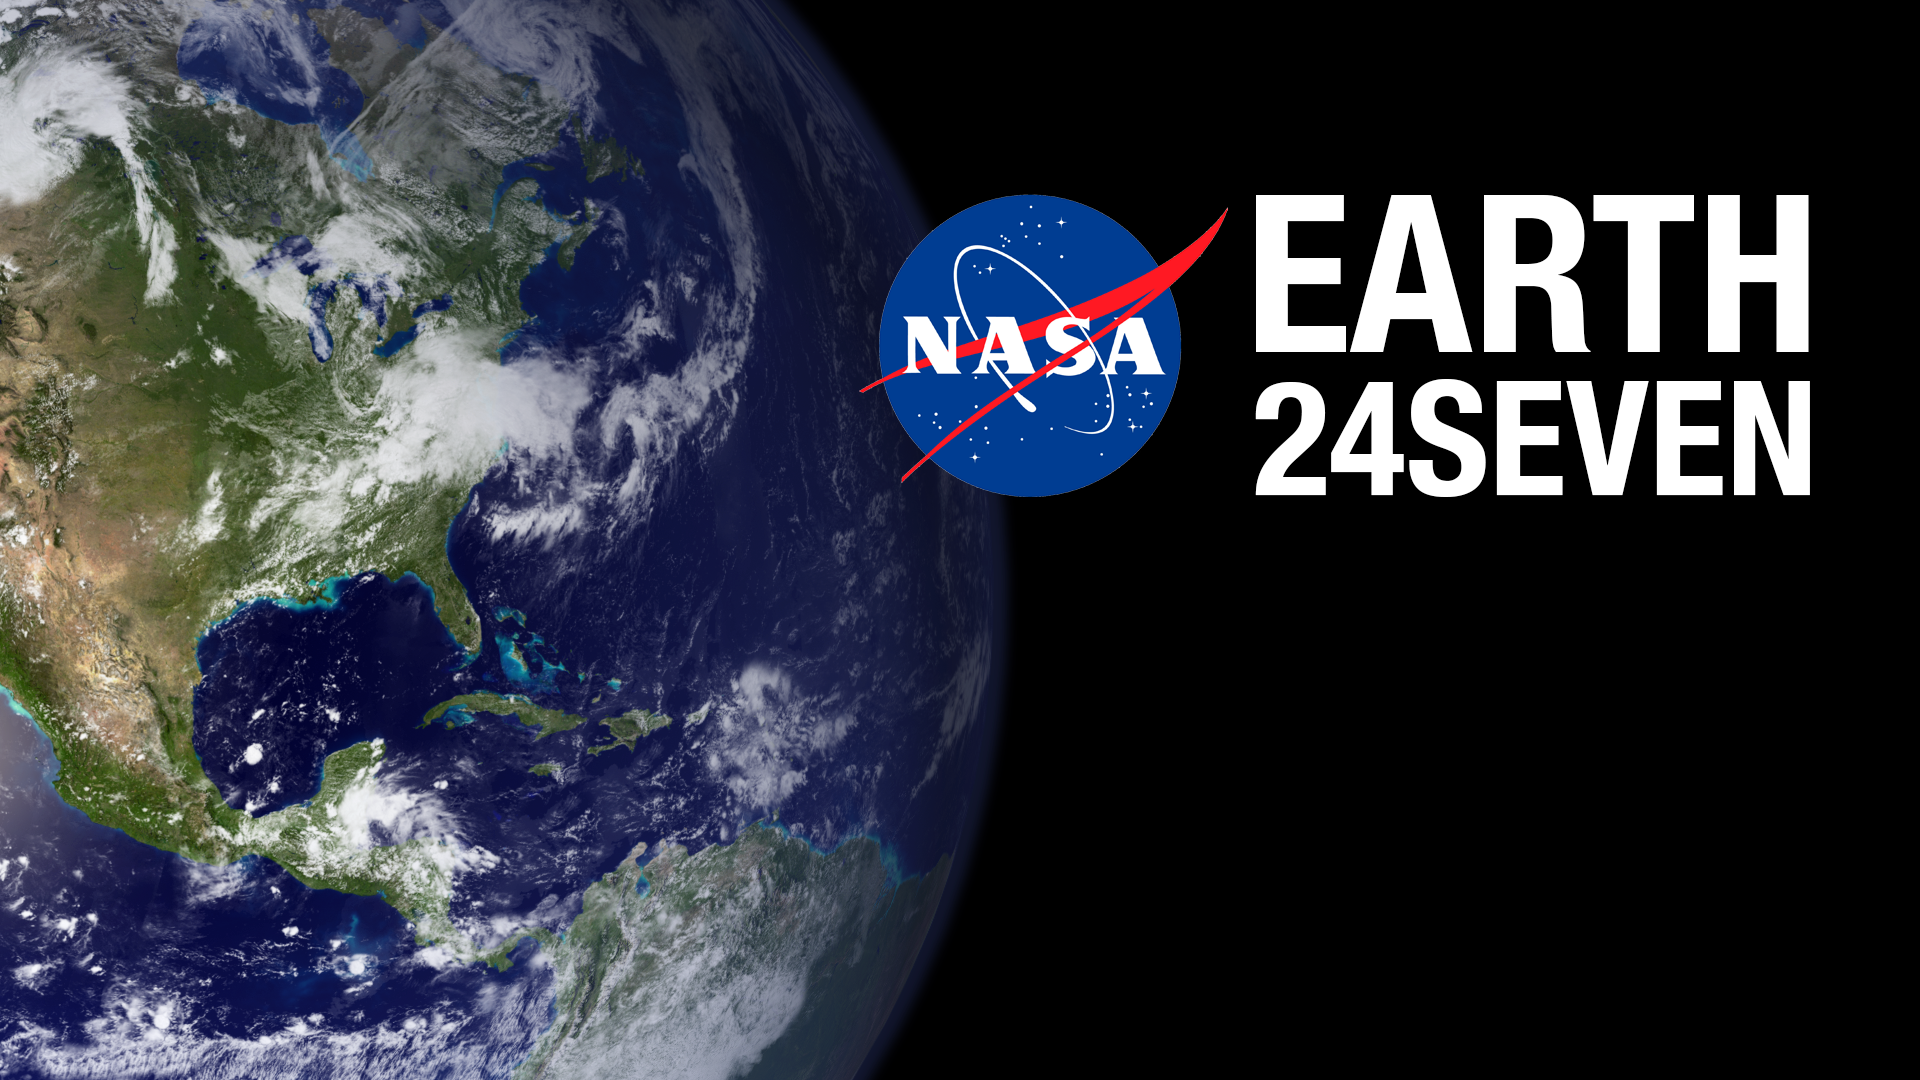 fb cover proposed v1 - Celebrate Earth Day 24 on April 22 with NASA on Social Media